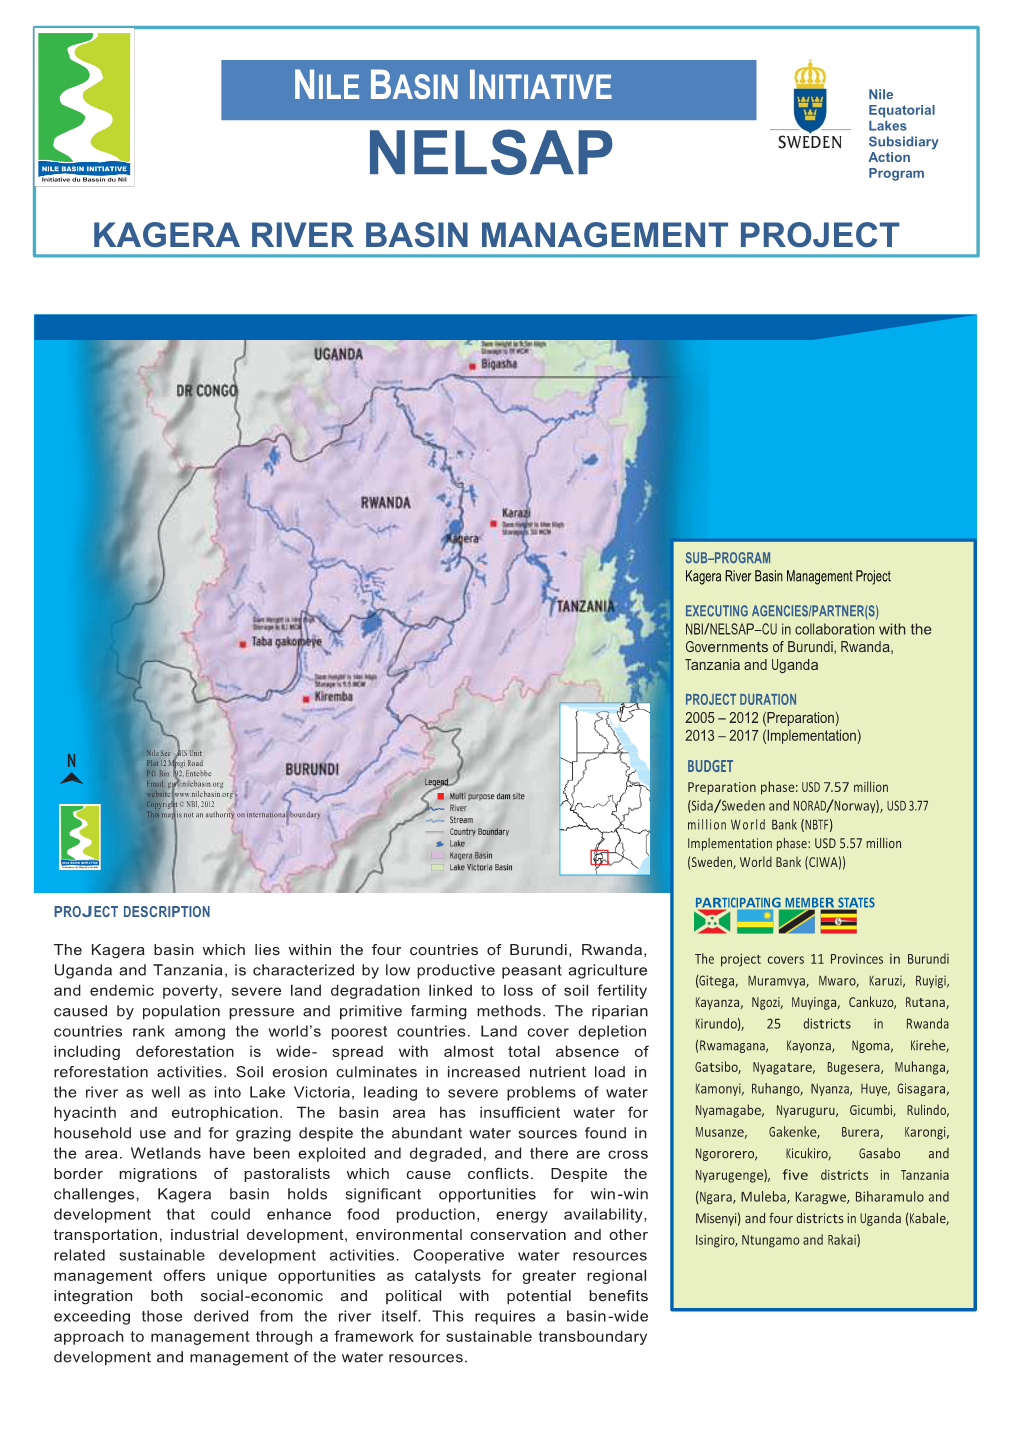 Kagera River Basin Management Project